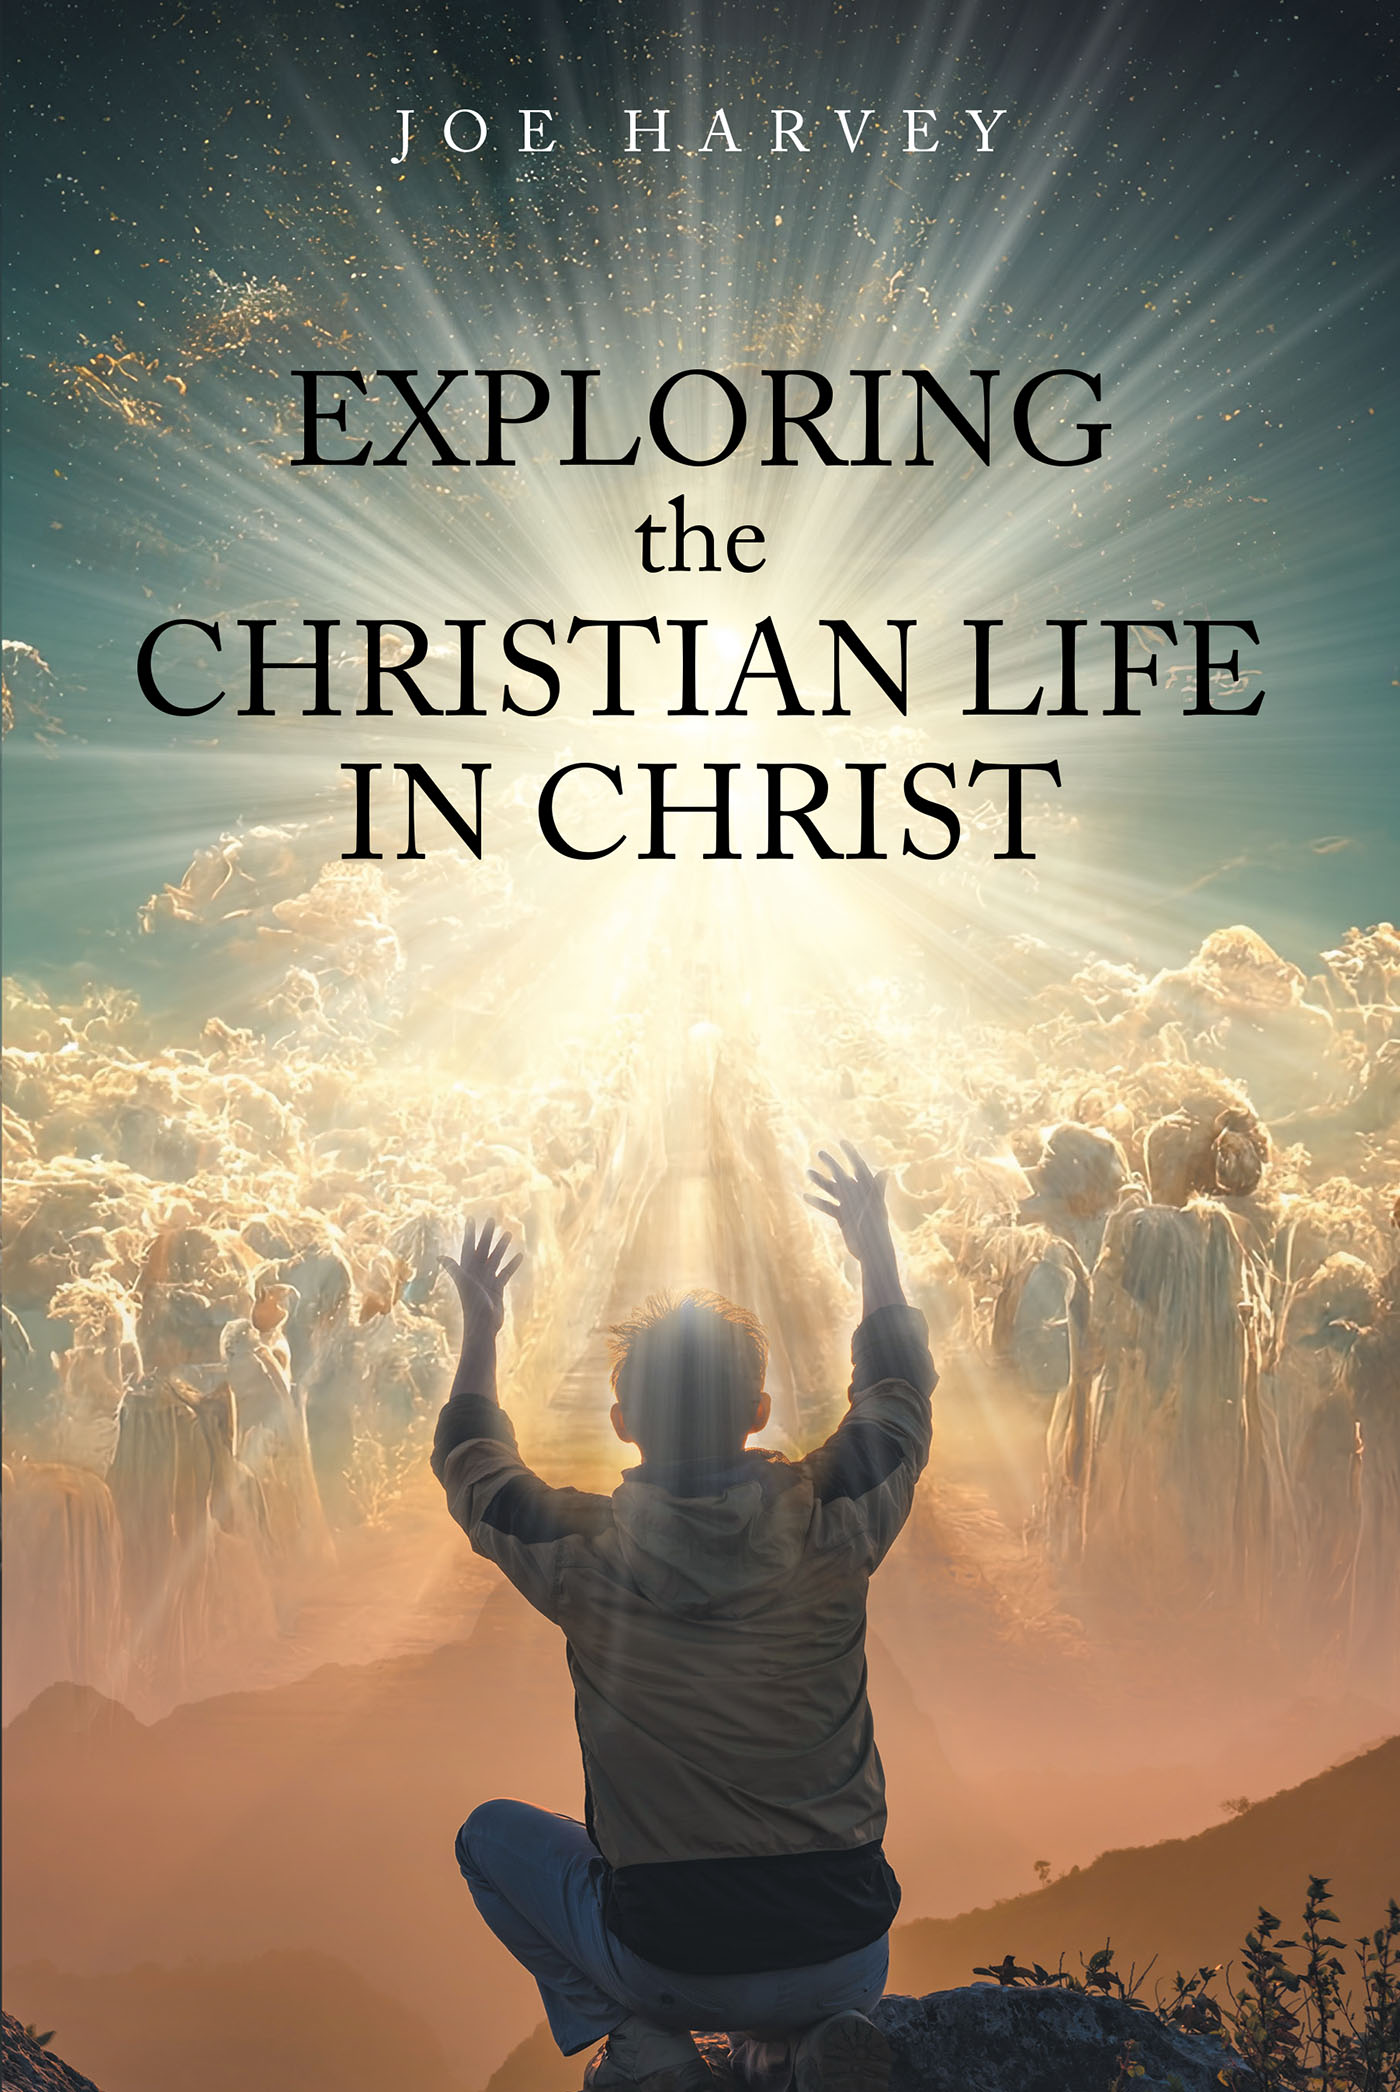 Joe Harvey’s Newly Released "Exploring the Christian Life in Christ" is a Thought-Provoking Collection of Five Spiritually Charged Essays